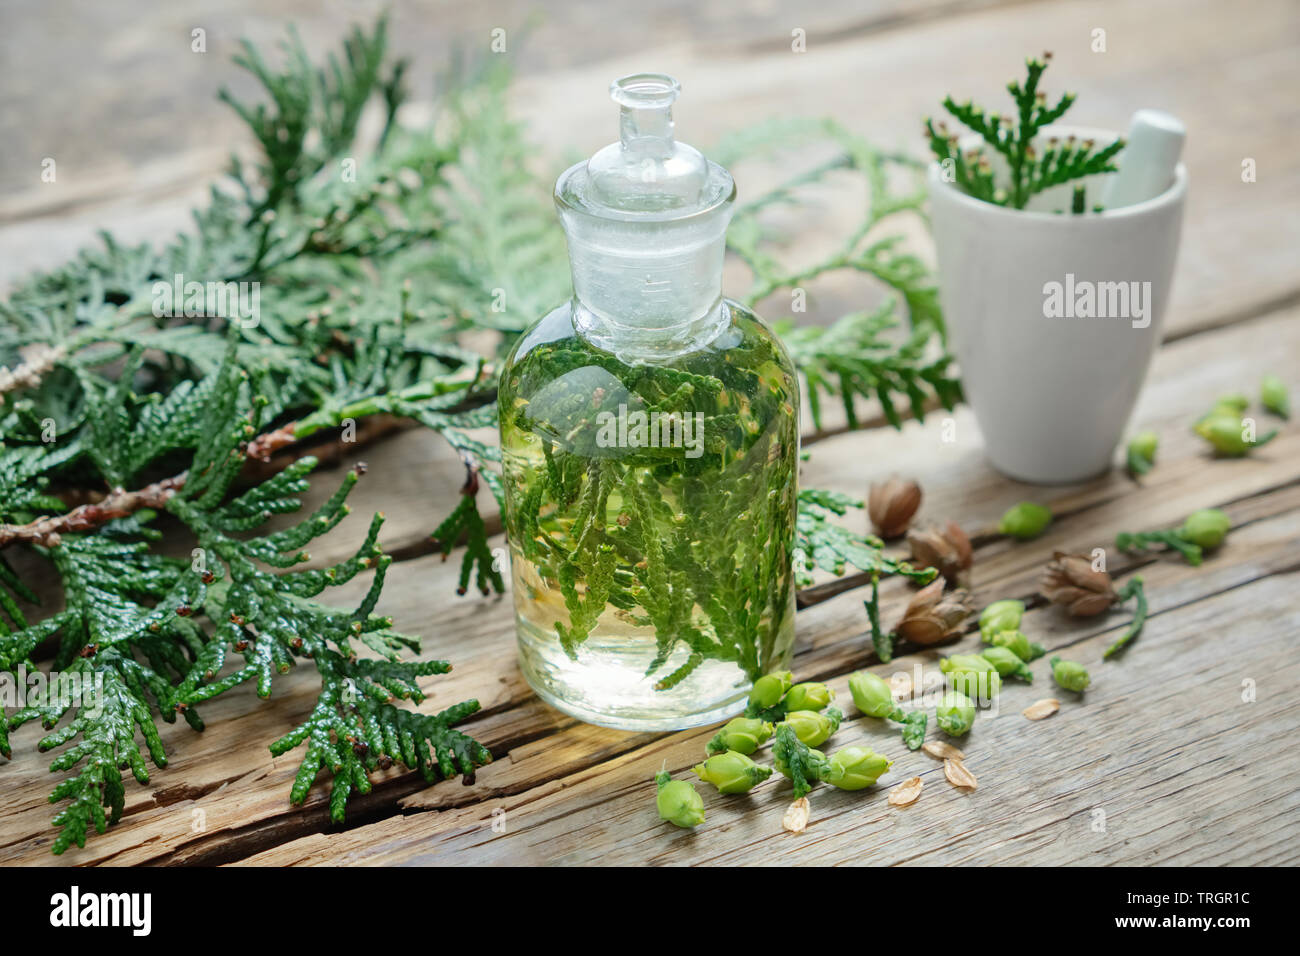 Bottle of Thuja infusion or oil, mortar and Thuja cones. Herbal medicine. Stock Photo